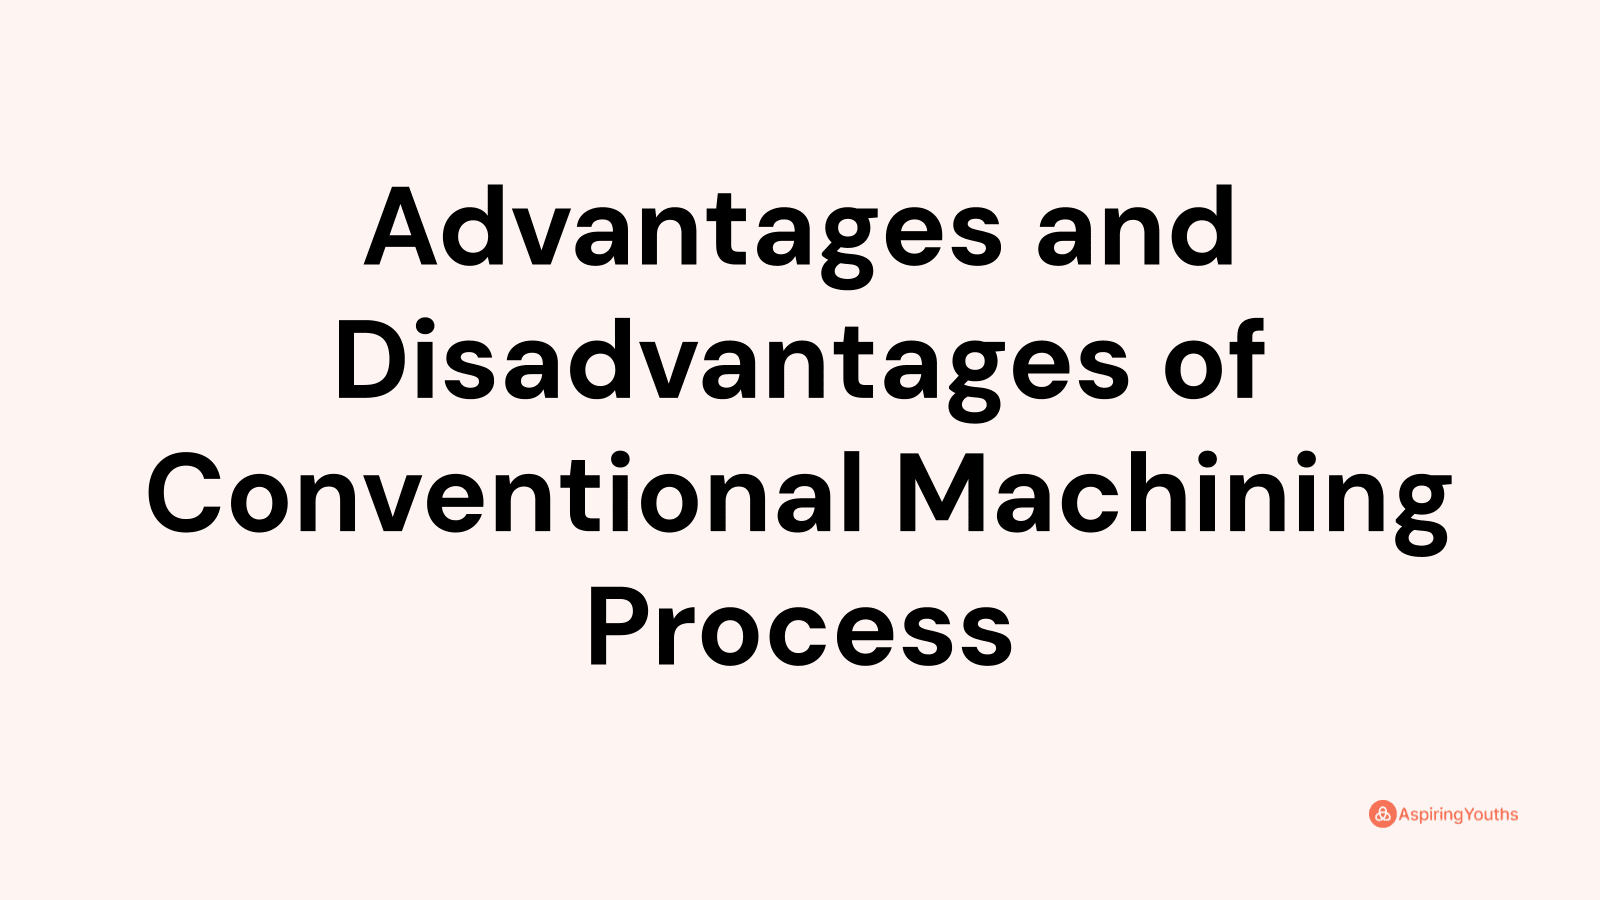 Advantages and disadvantages of Conventional Machining Process